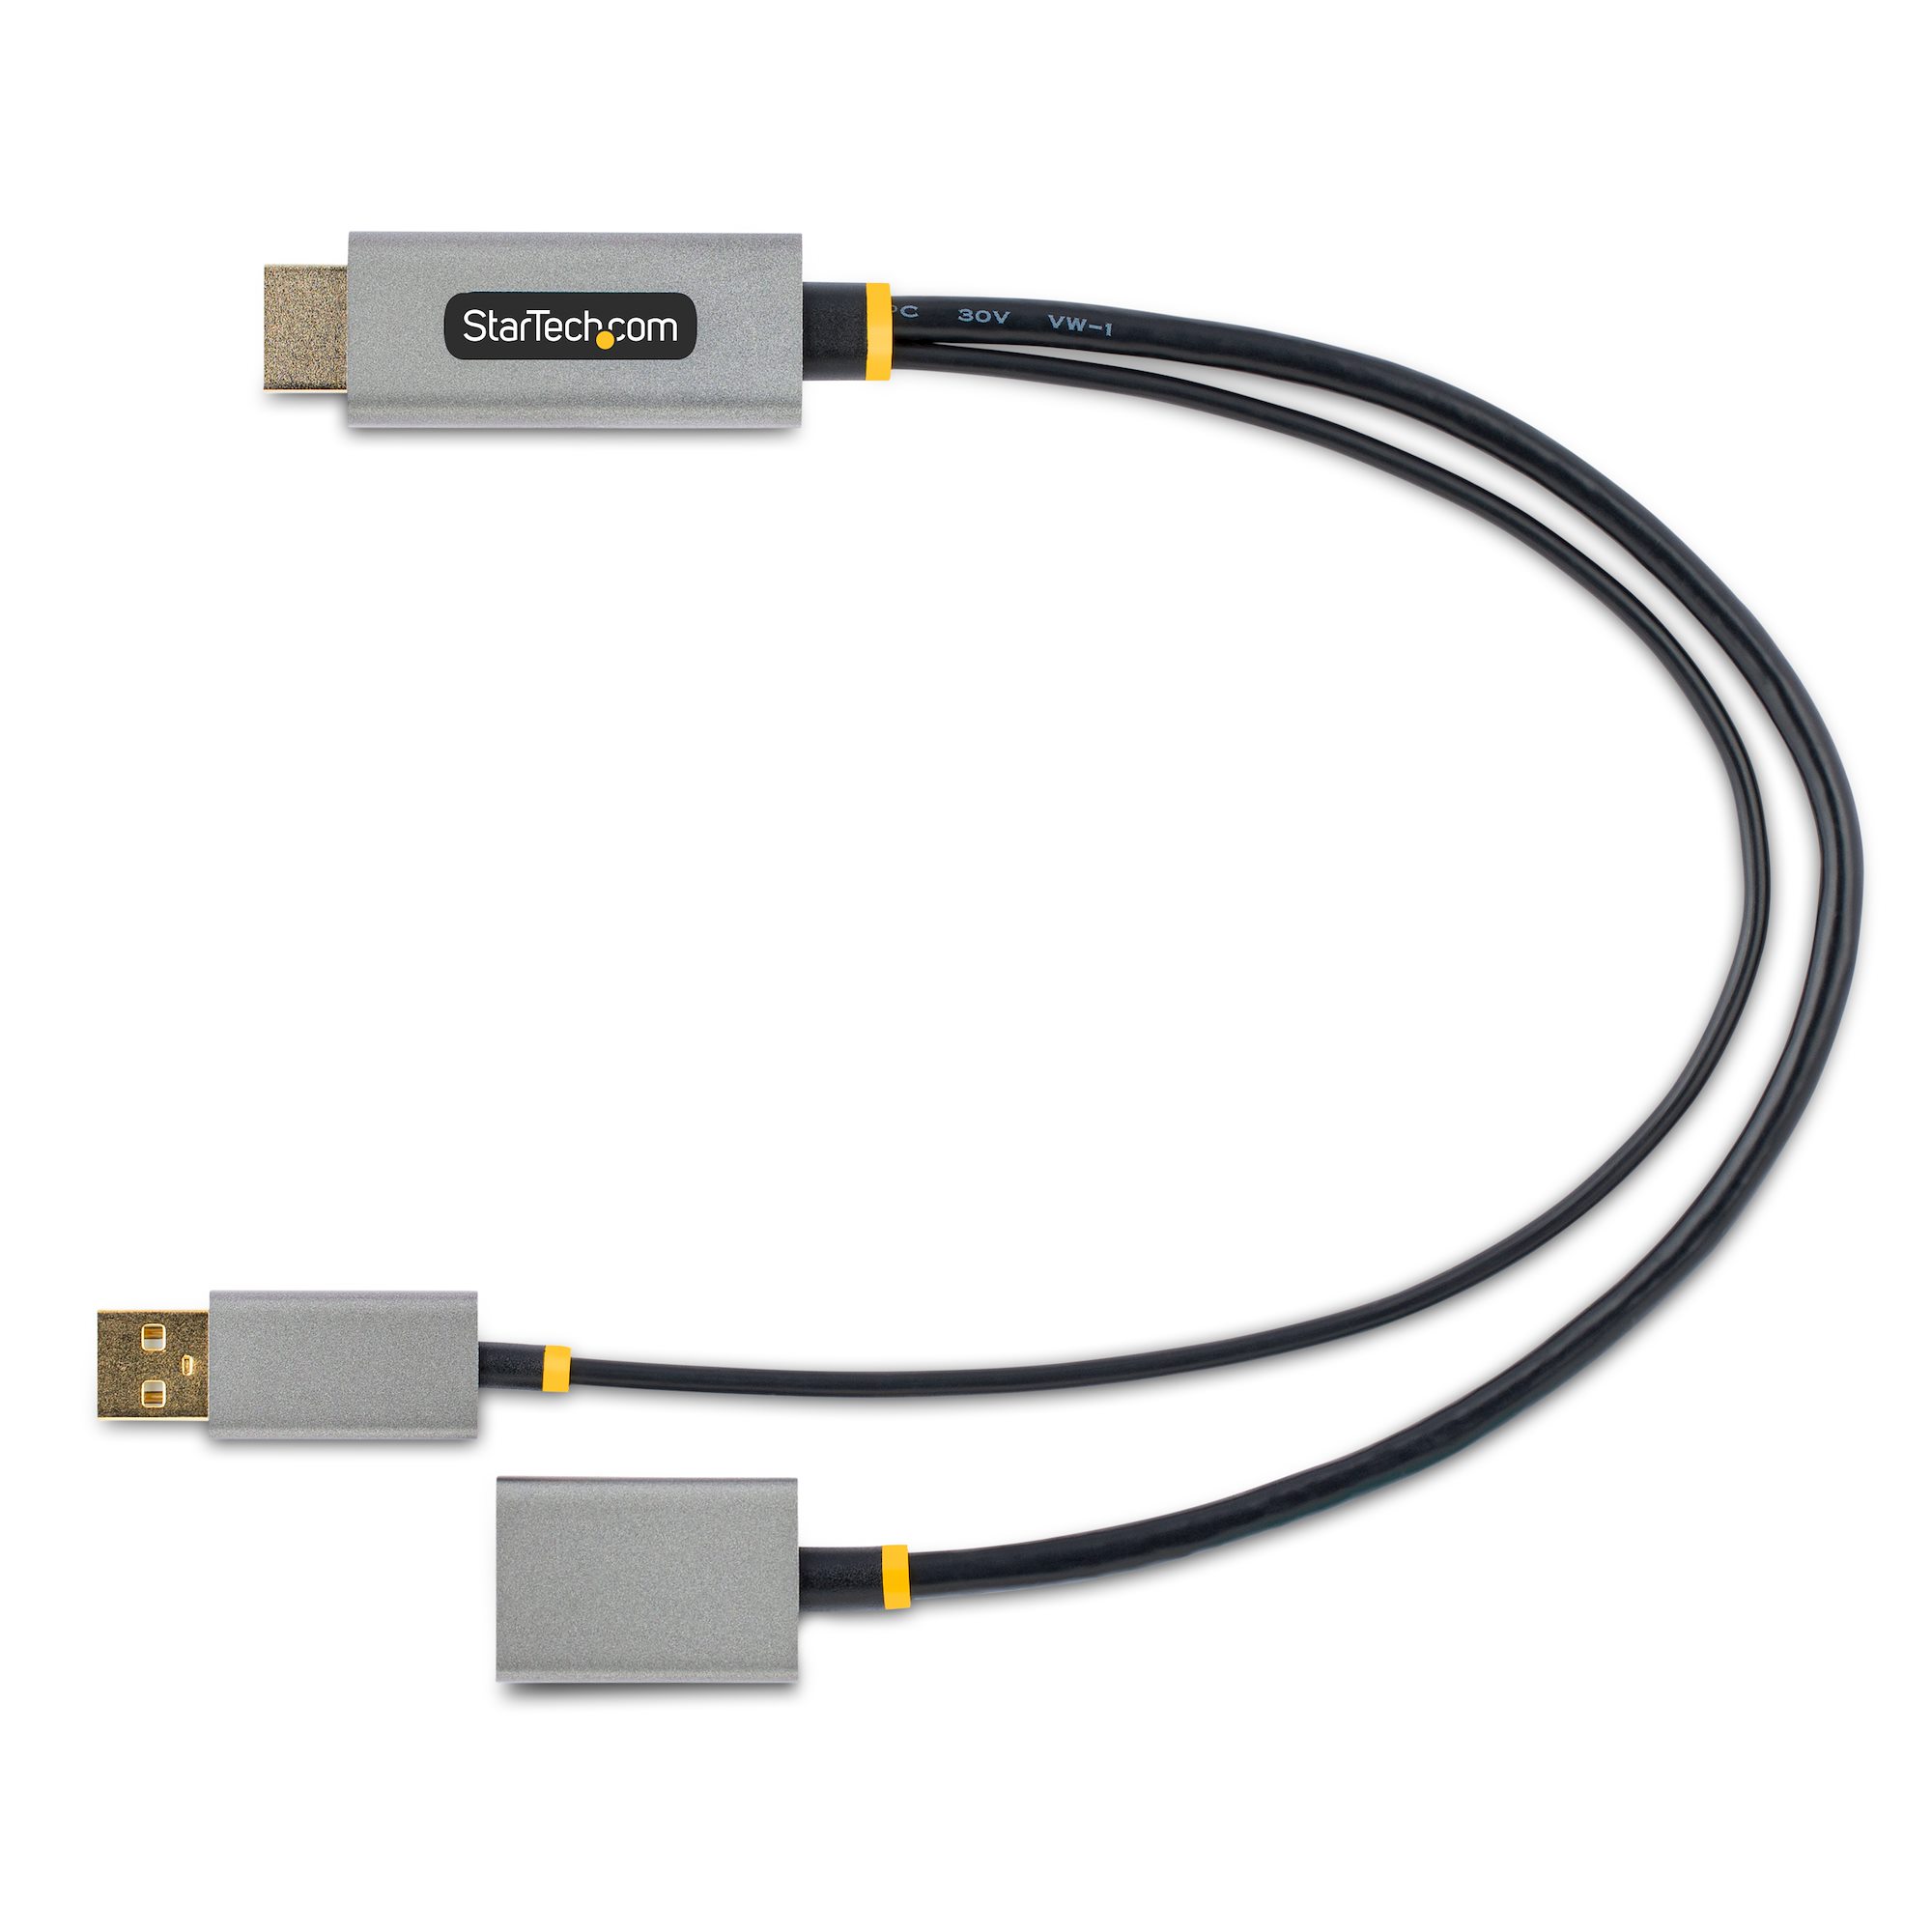 FOINNEX HDMI to DisplayPort Adapter, Not Bidirectional HDMI to Display  Port, only from HDMI Output to DP Input 4K@60Hz HDMI Male to Display Port